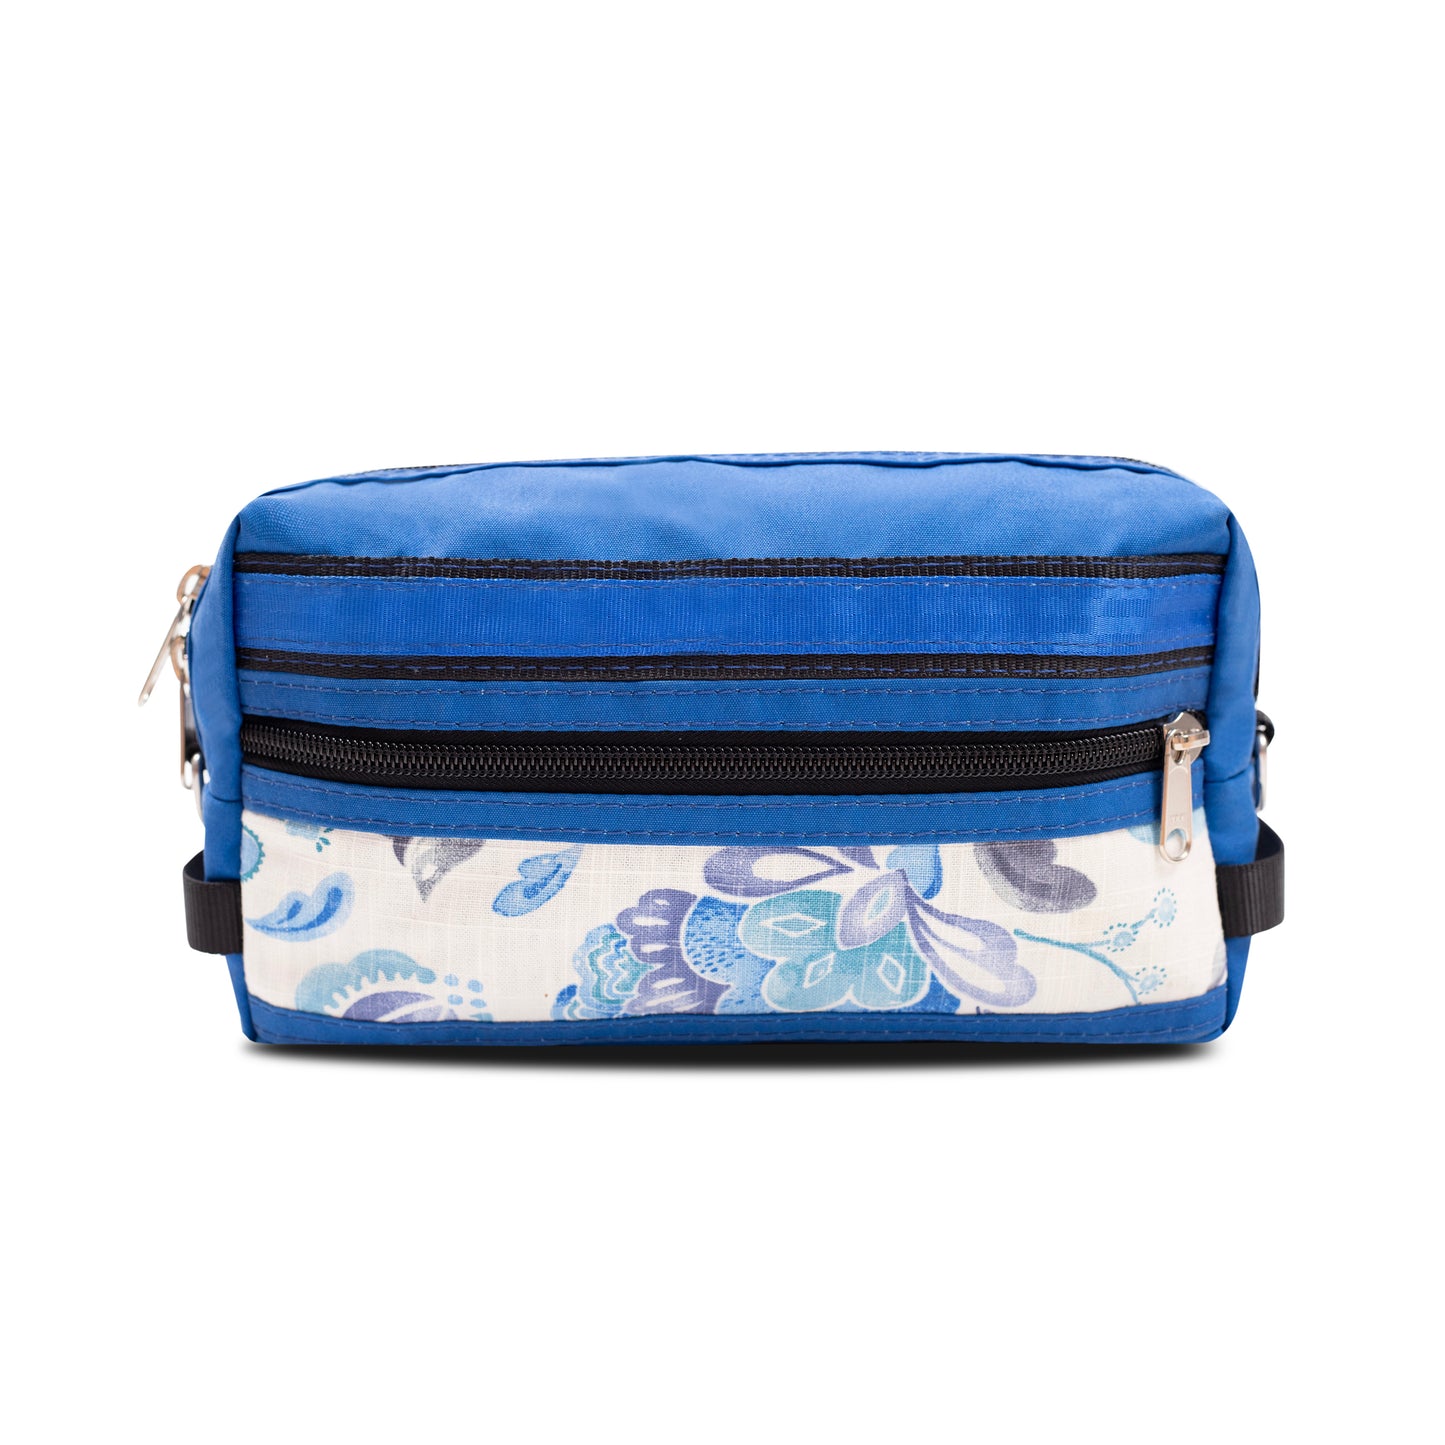 Large Blue Canvas Kit Bag with limited edition printed fabric.